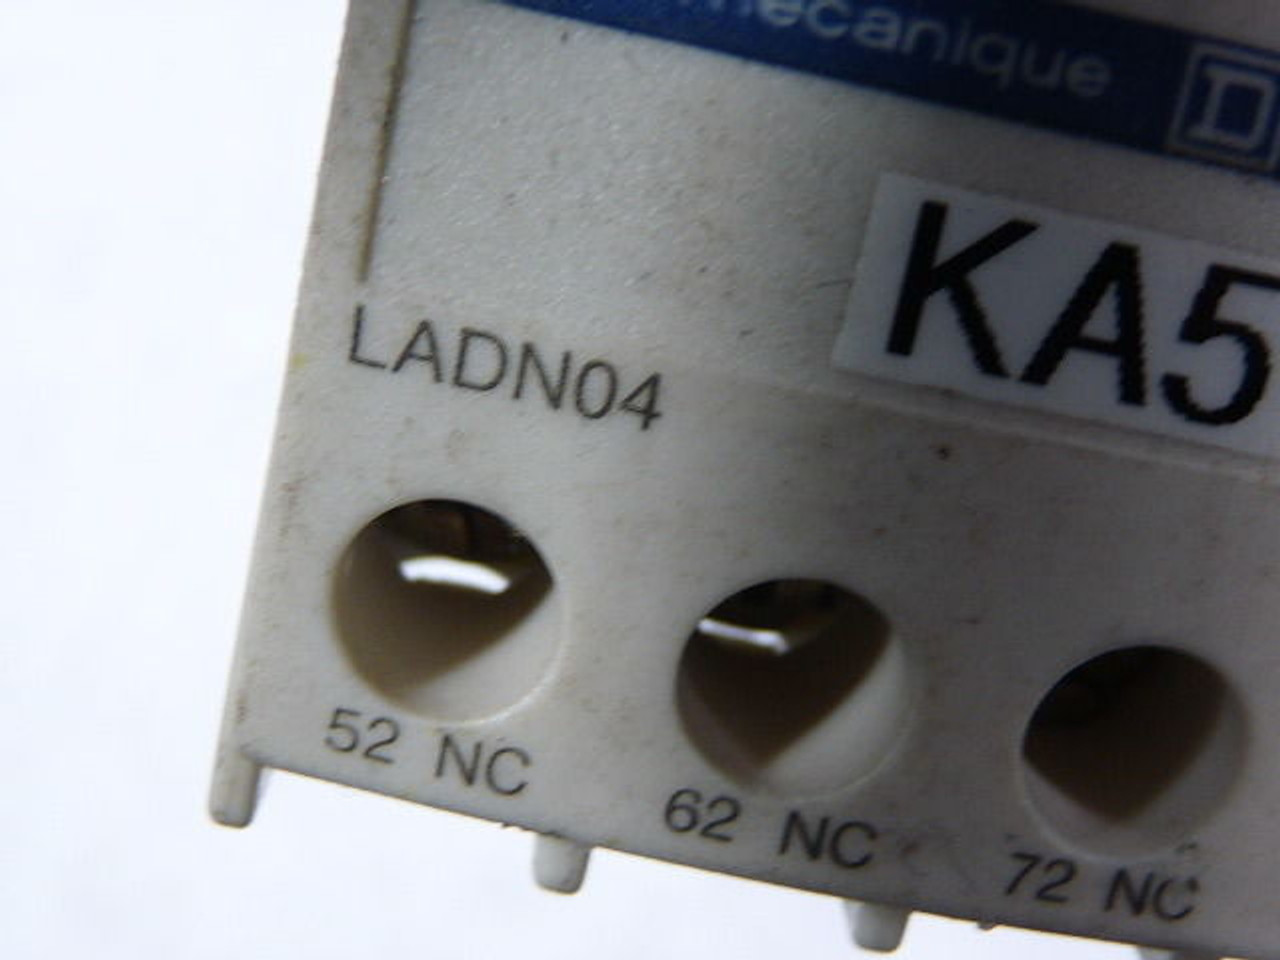 Telemecanique LAD-N04 Auxiliary Contact Block USED